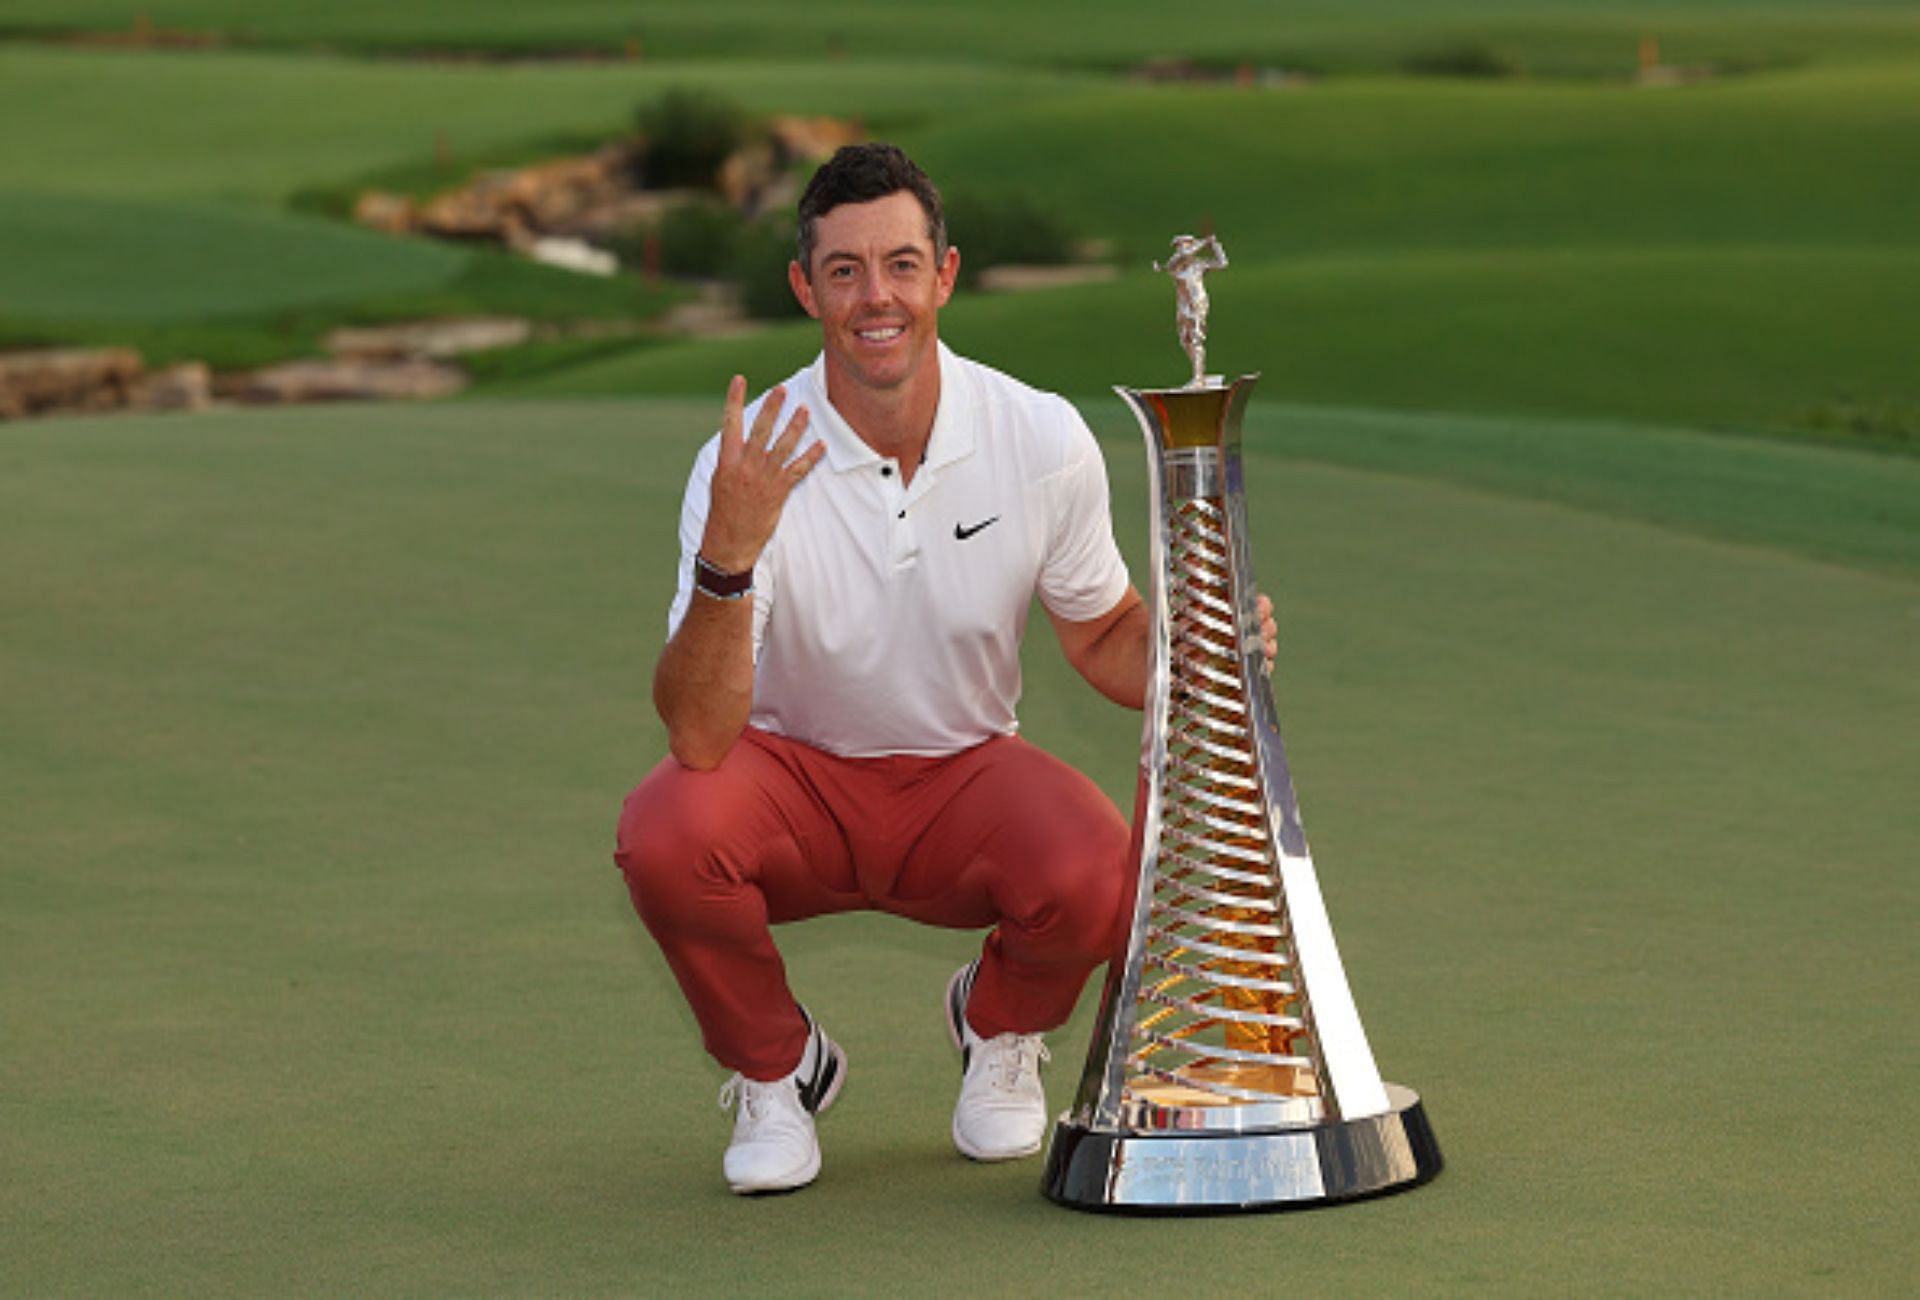 Rory McIlroy with his 2022 DP World Tour Championship trophy (Image via Getty).